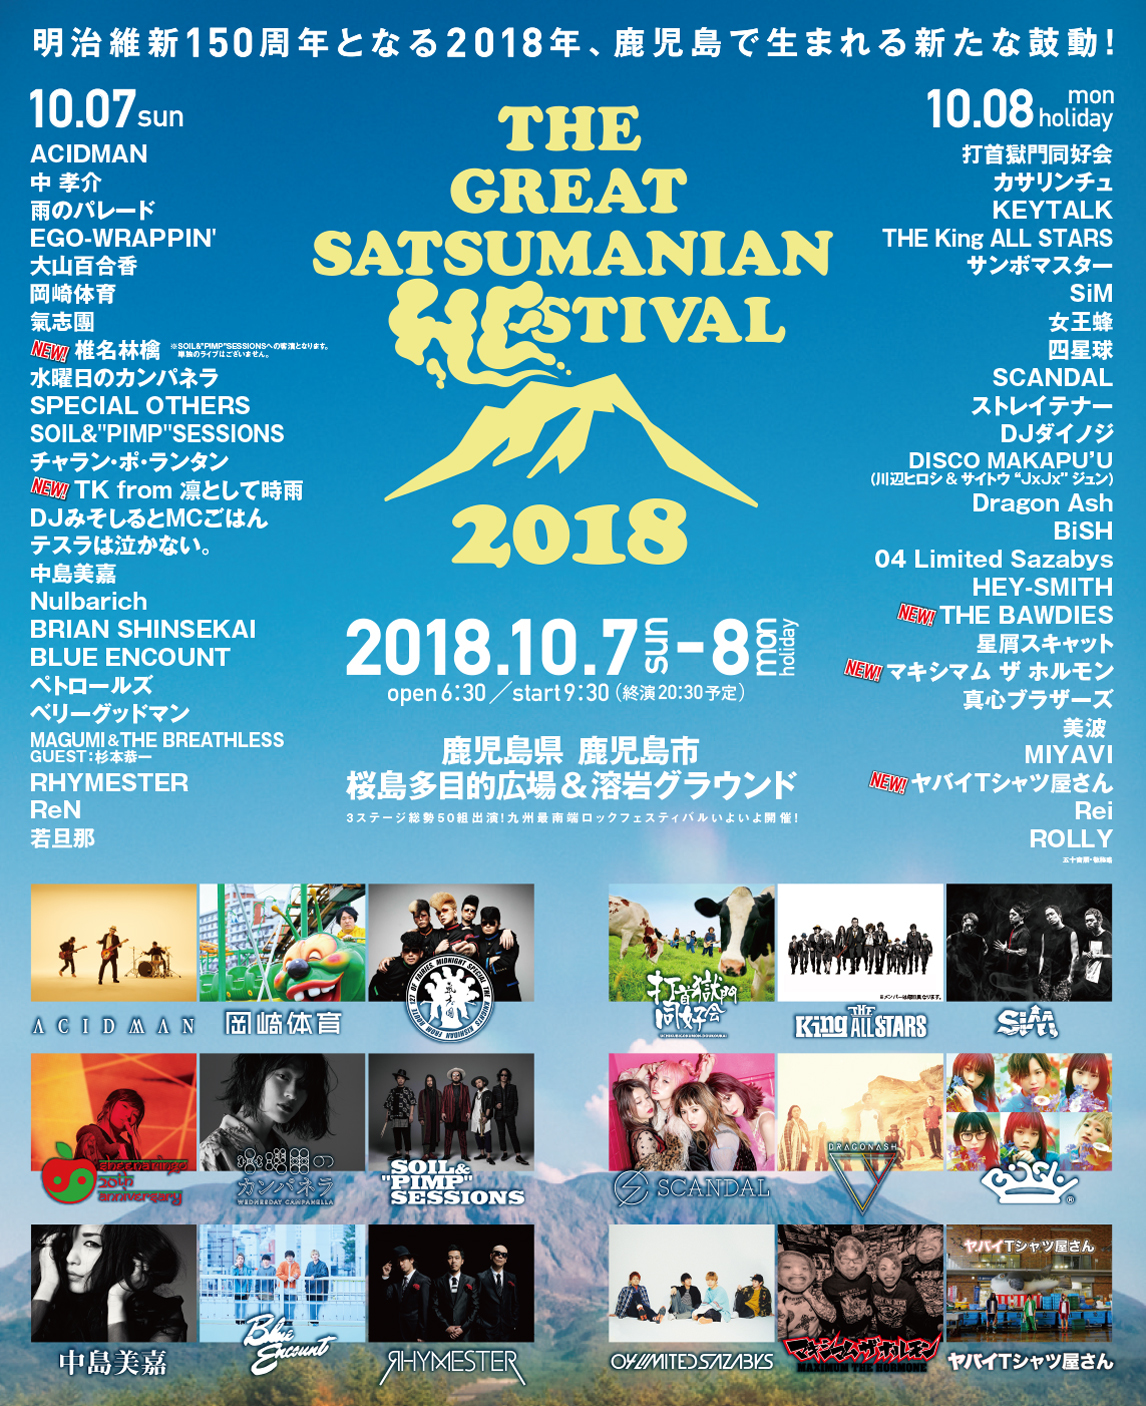 THE GREAT SATSUMANIAN HESTIVAL 2018